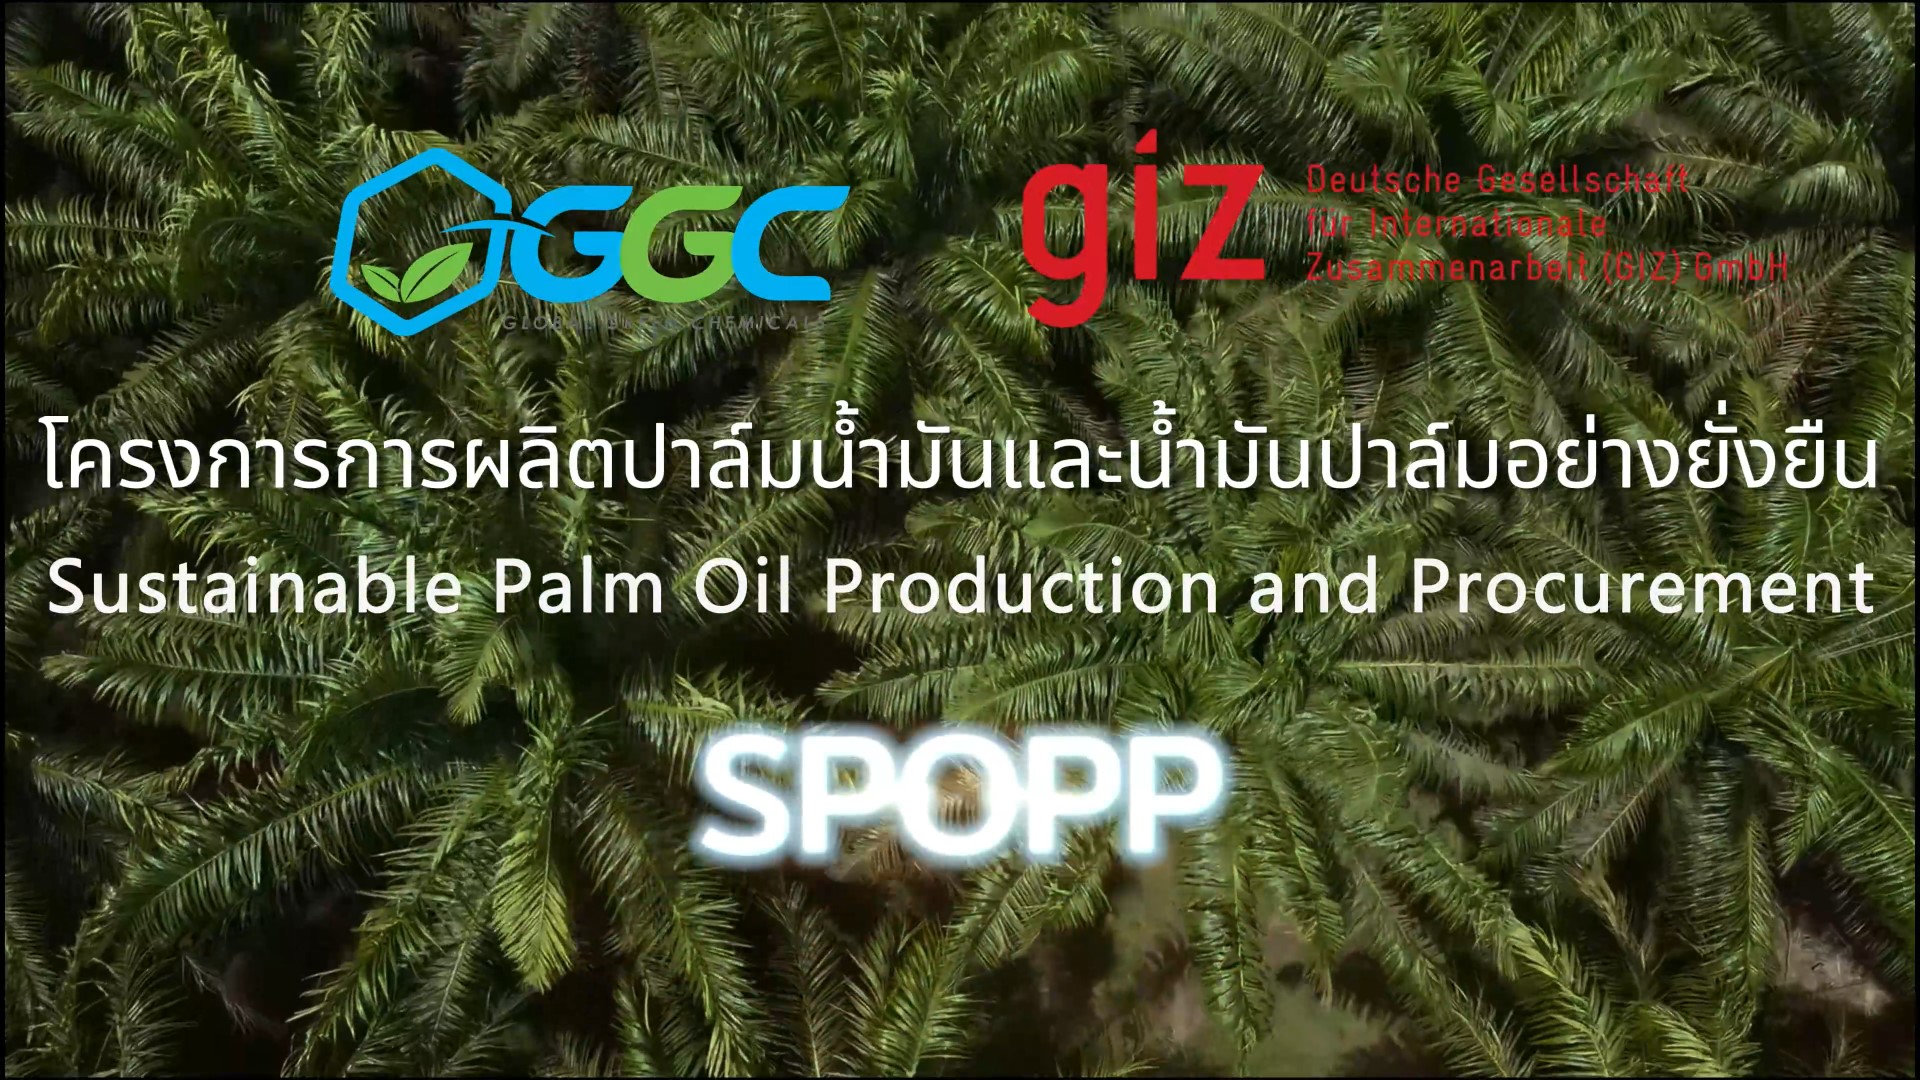 Sustainable Palm Oil Production and Procurement